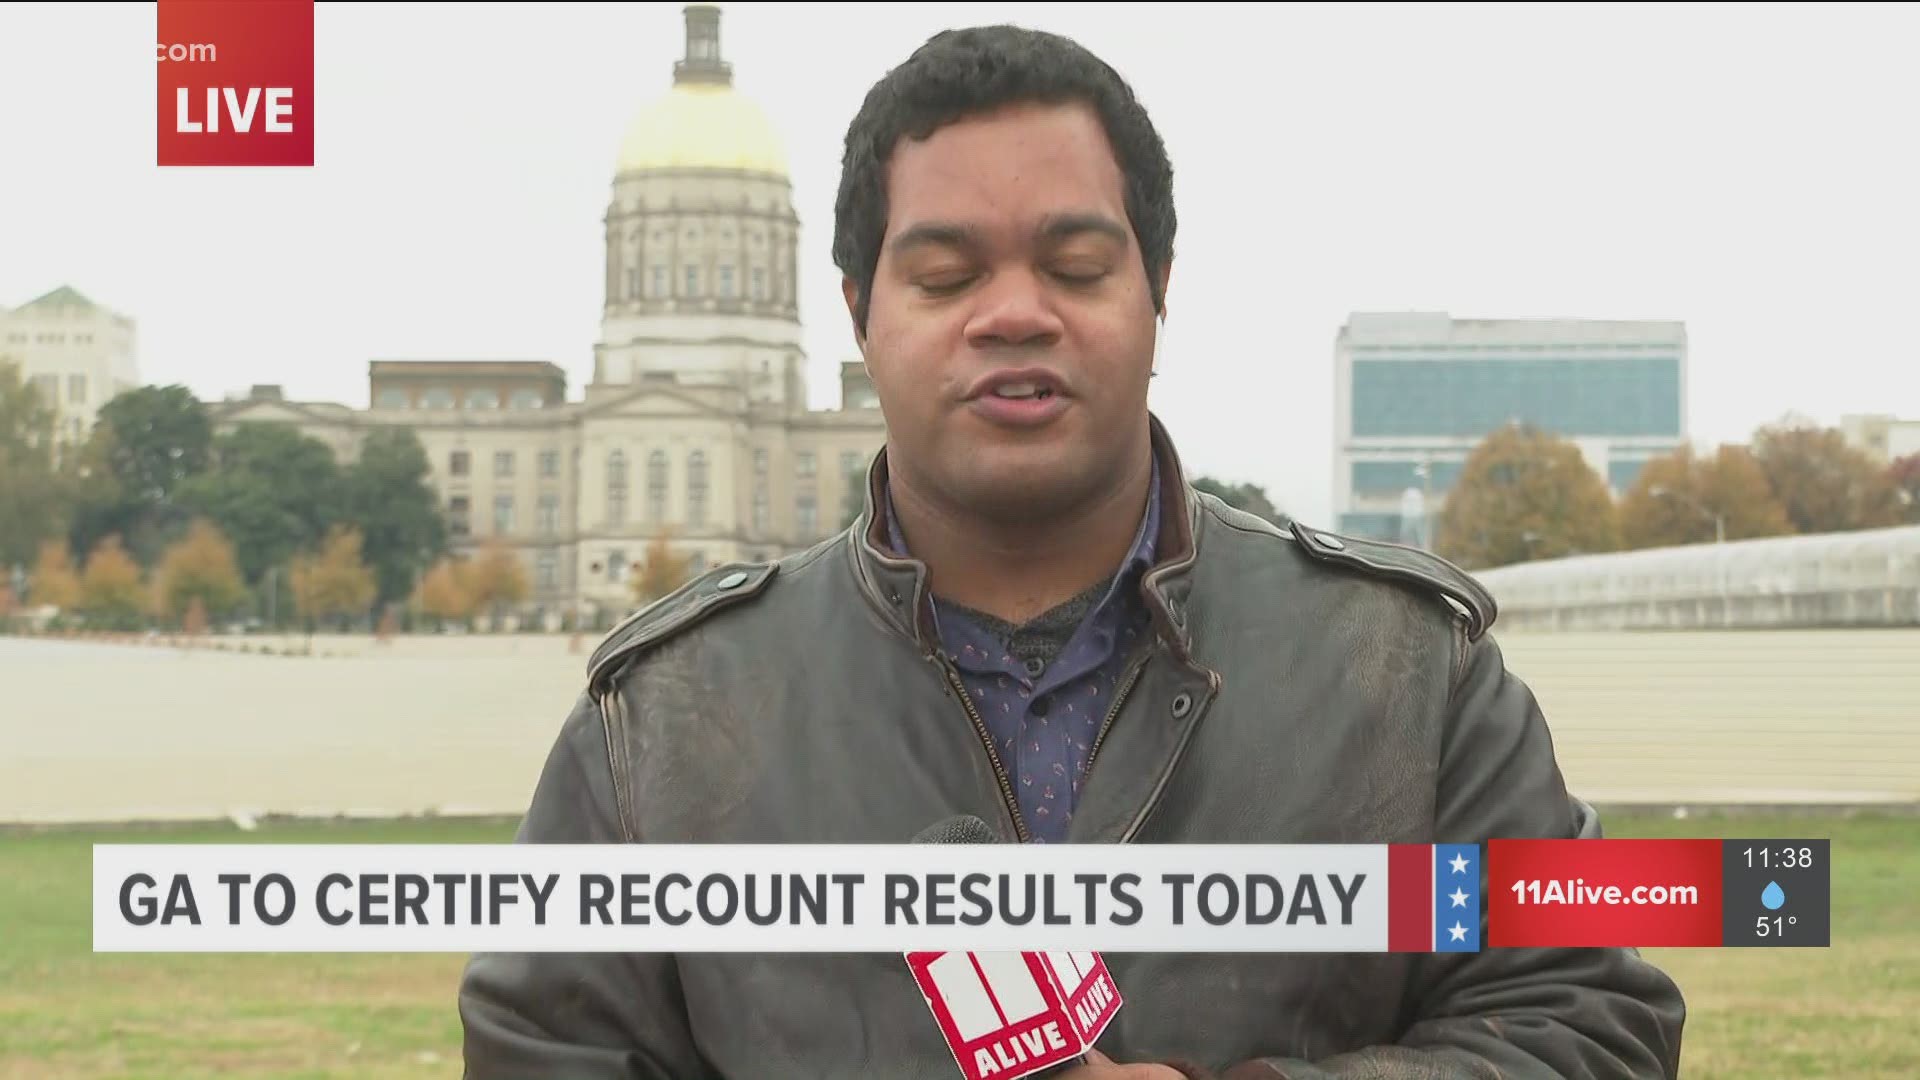 The state is expected to certify its results again today after an official recount.